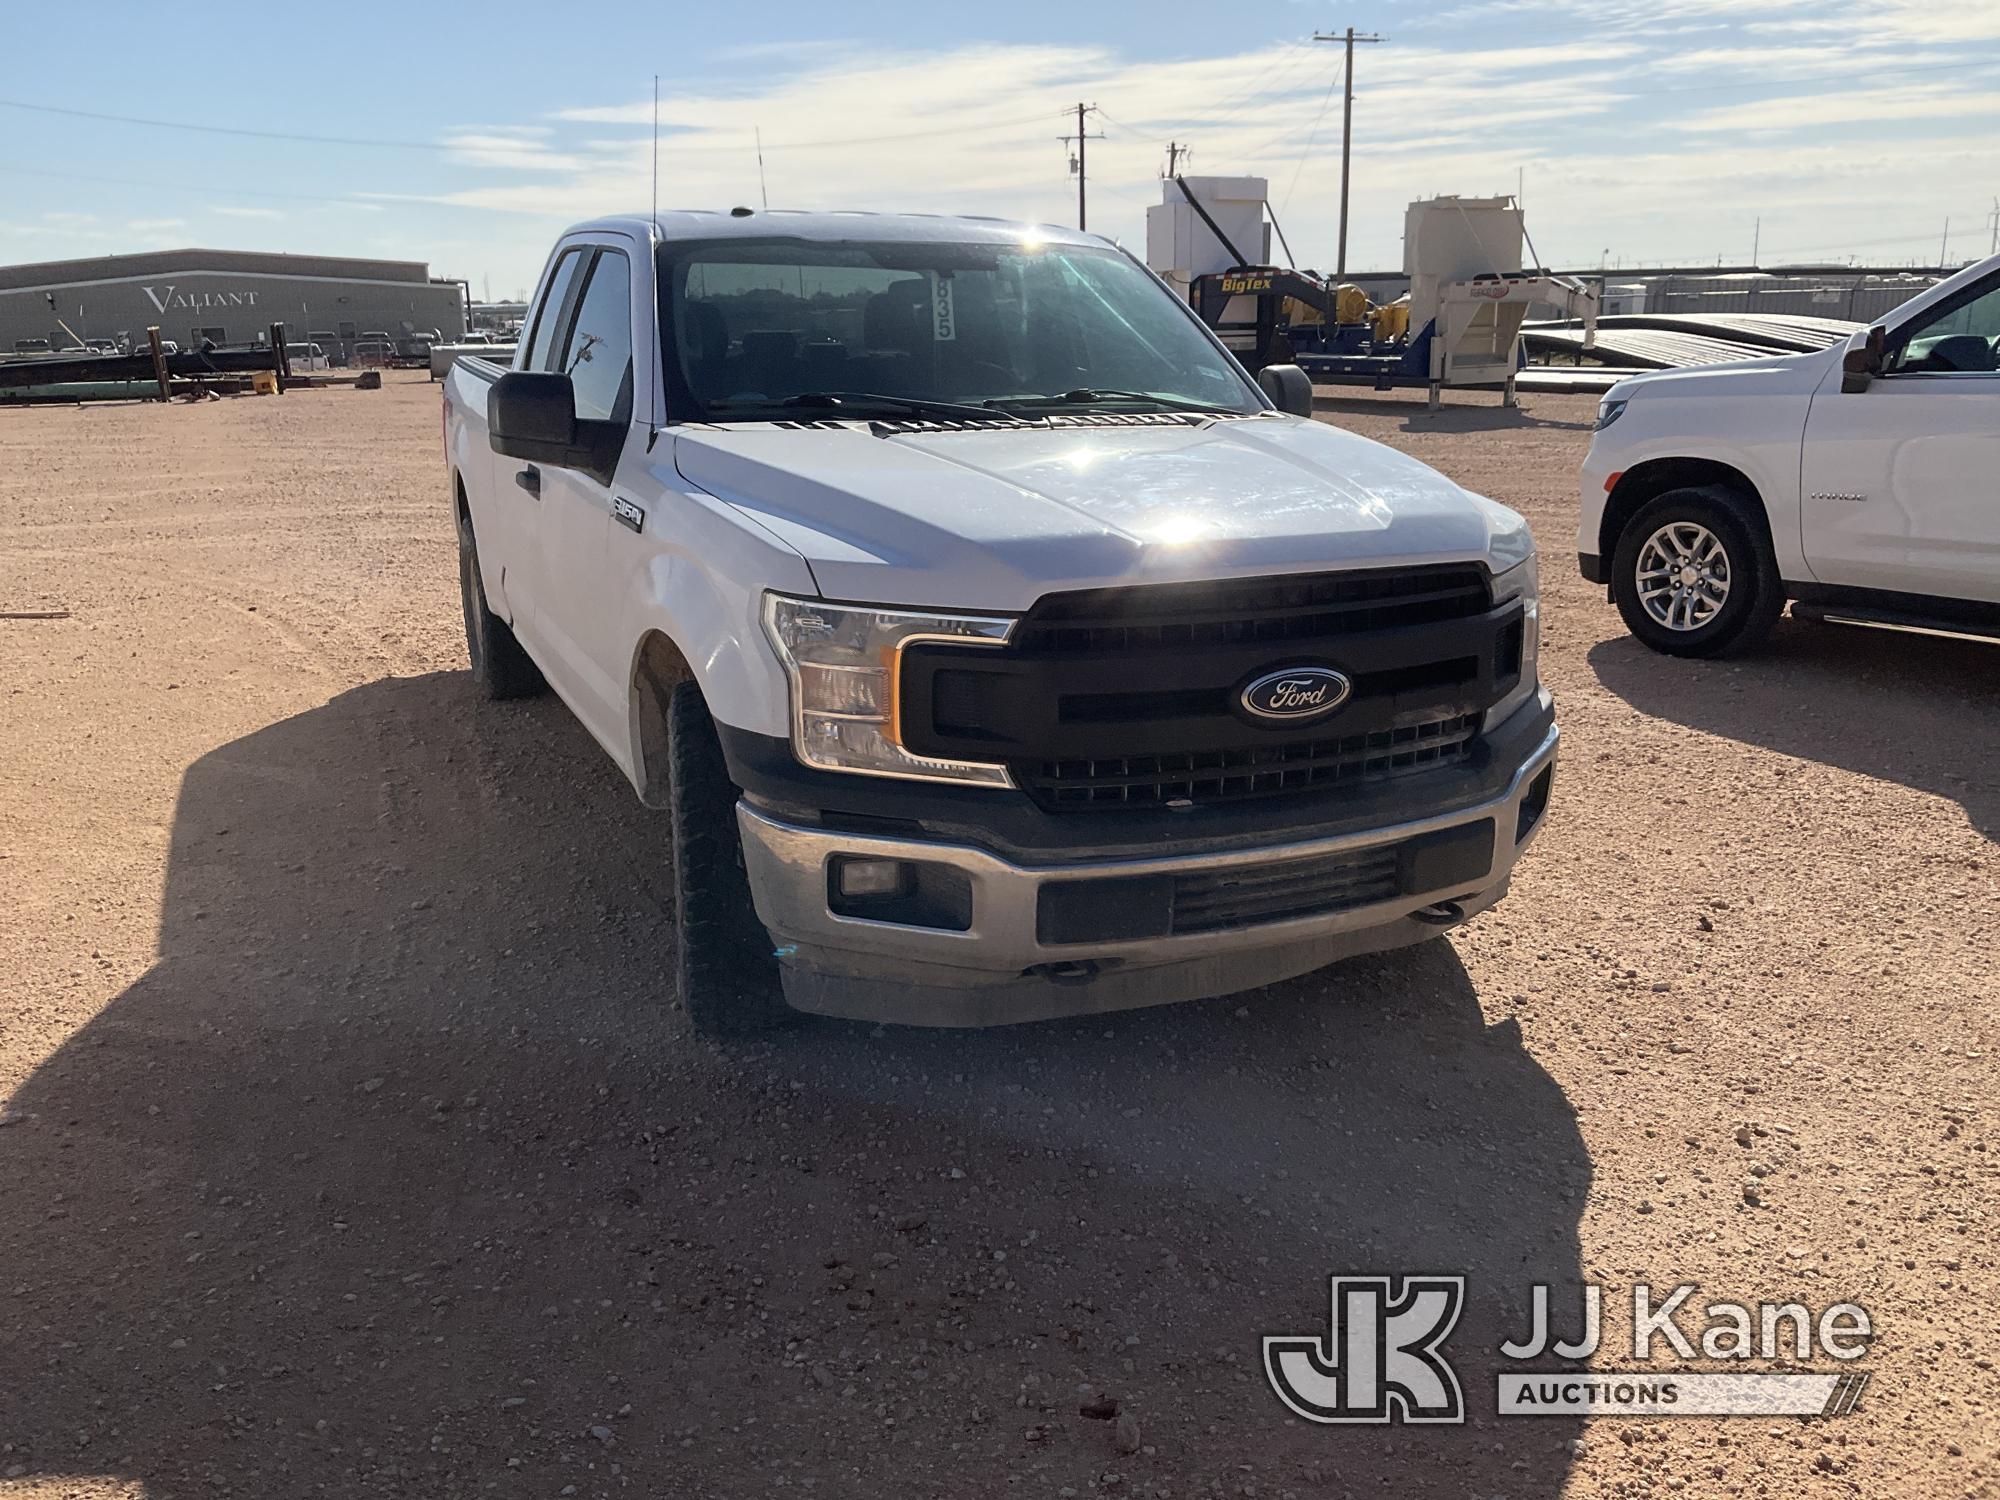 (Midland, TX) 2018 Ford F150 4x4 Extended-Cab Pickup Truck Runs & Moves) (Jump to start, hail damage